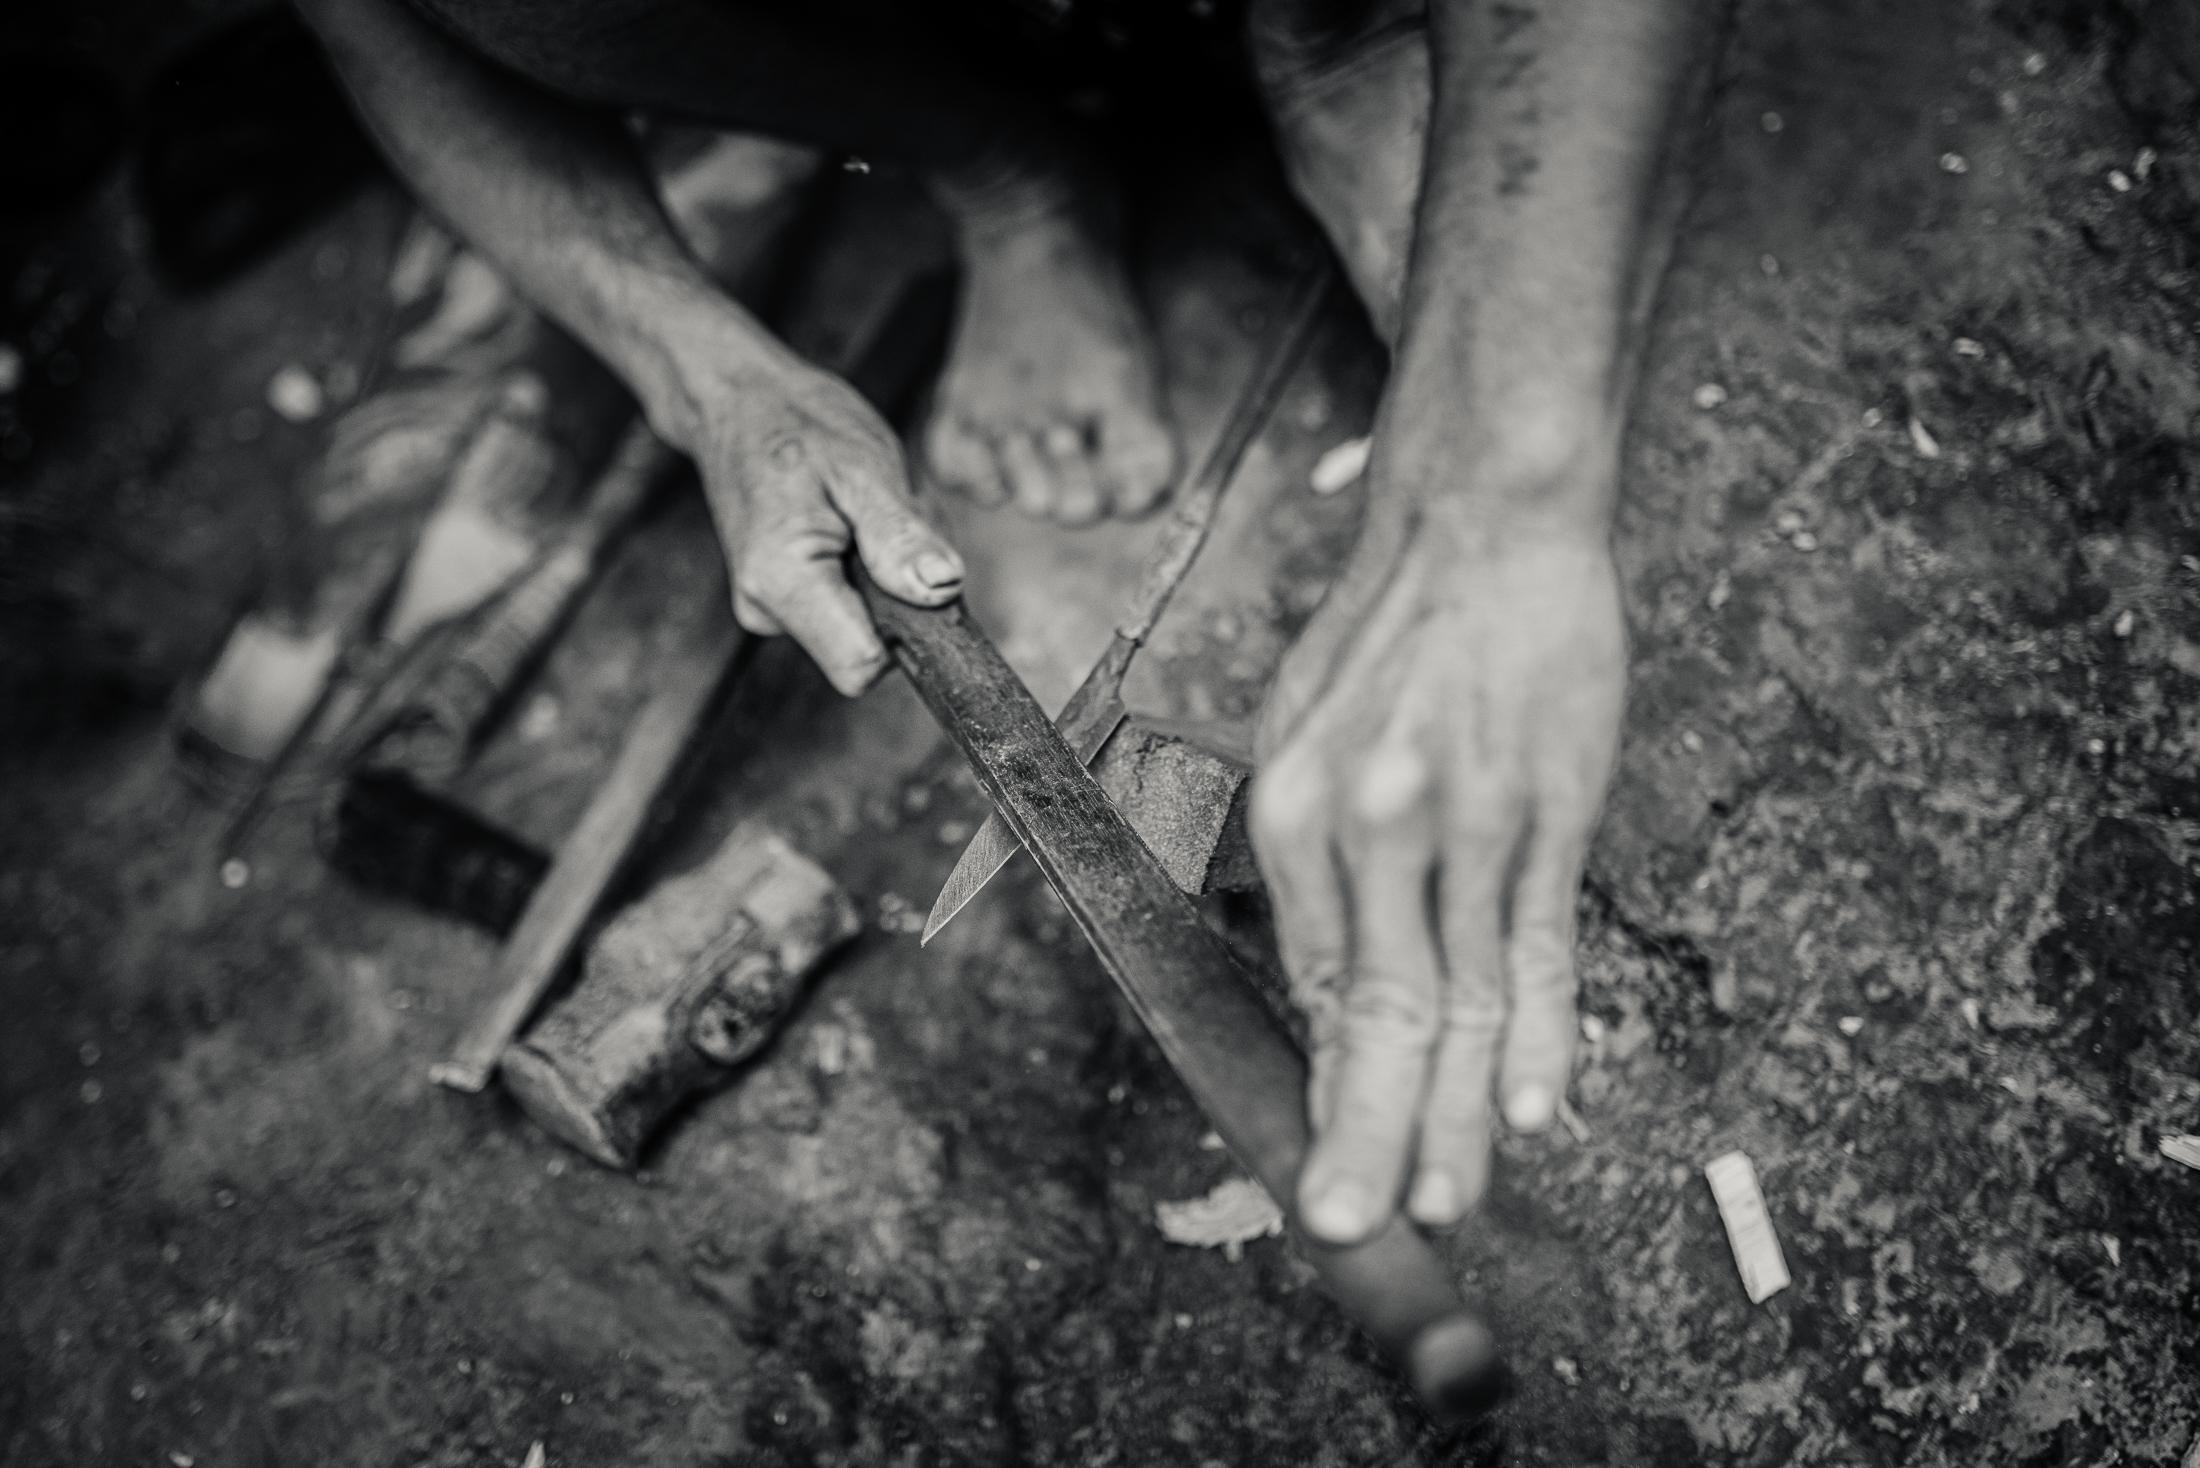 Indigenous Land Rights in Sarawak -  A man works on an edged tool in the Long Beku village...